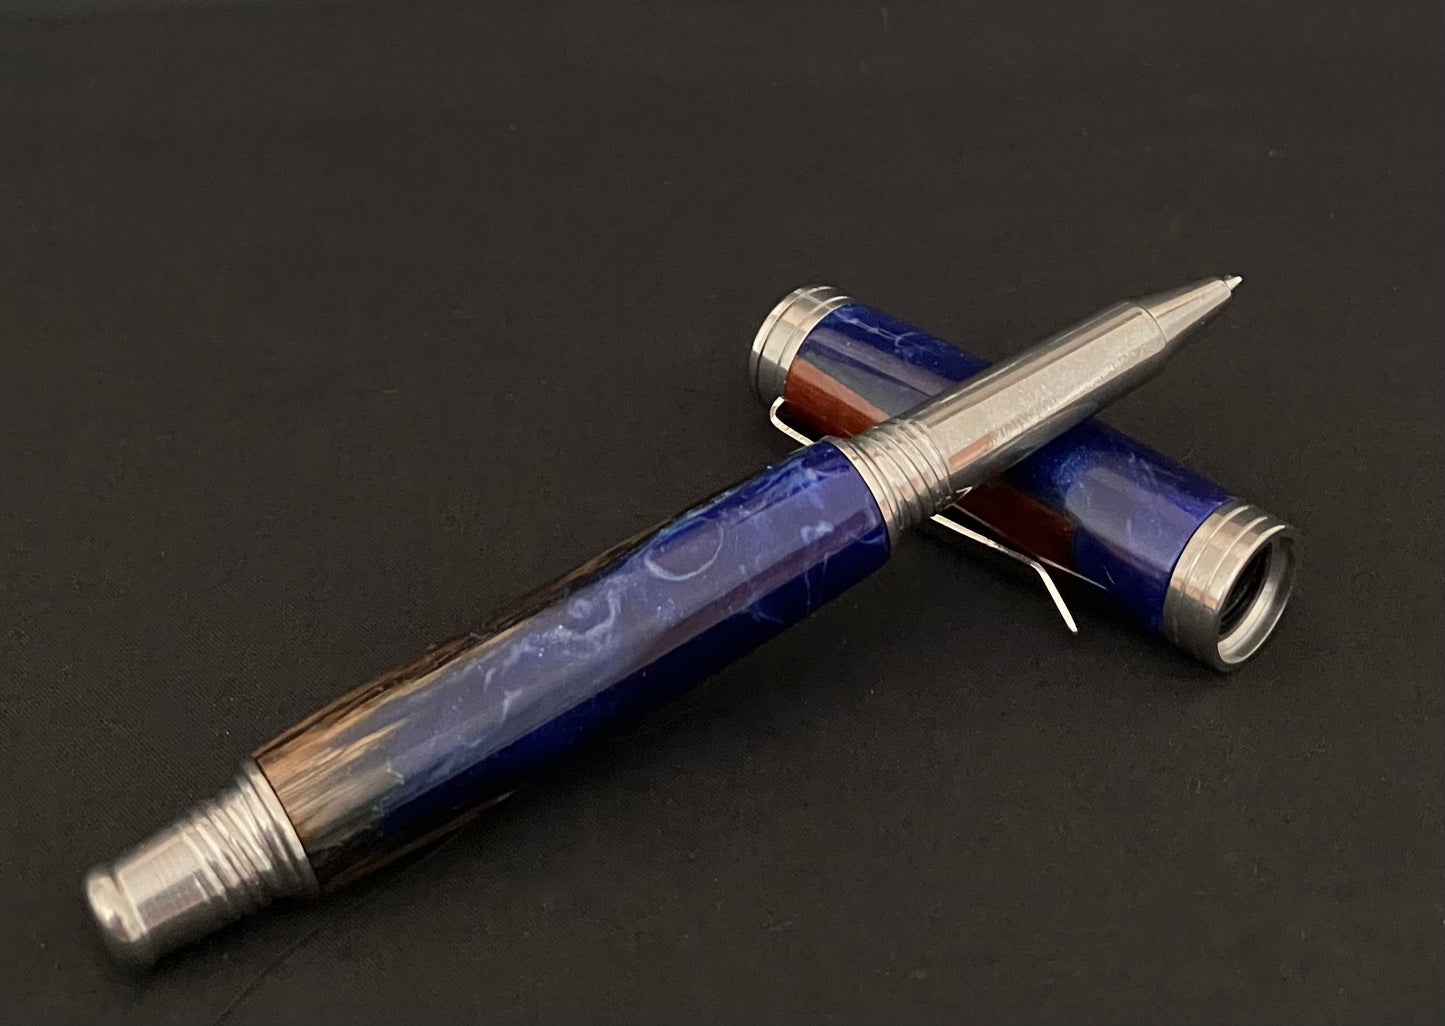 RB494-0923P Stormy Seas - Handcrafted Rollerball Pen